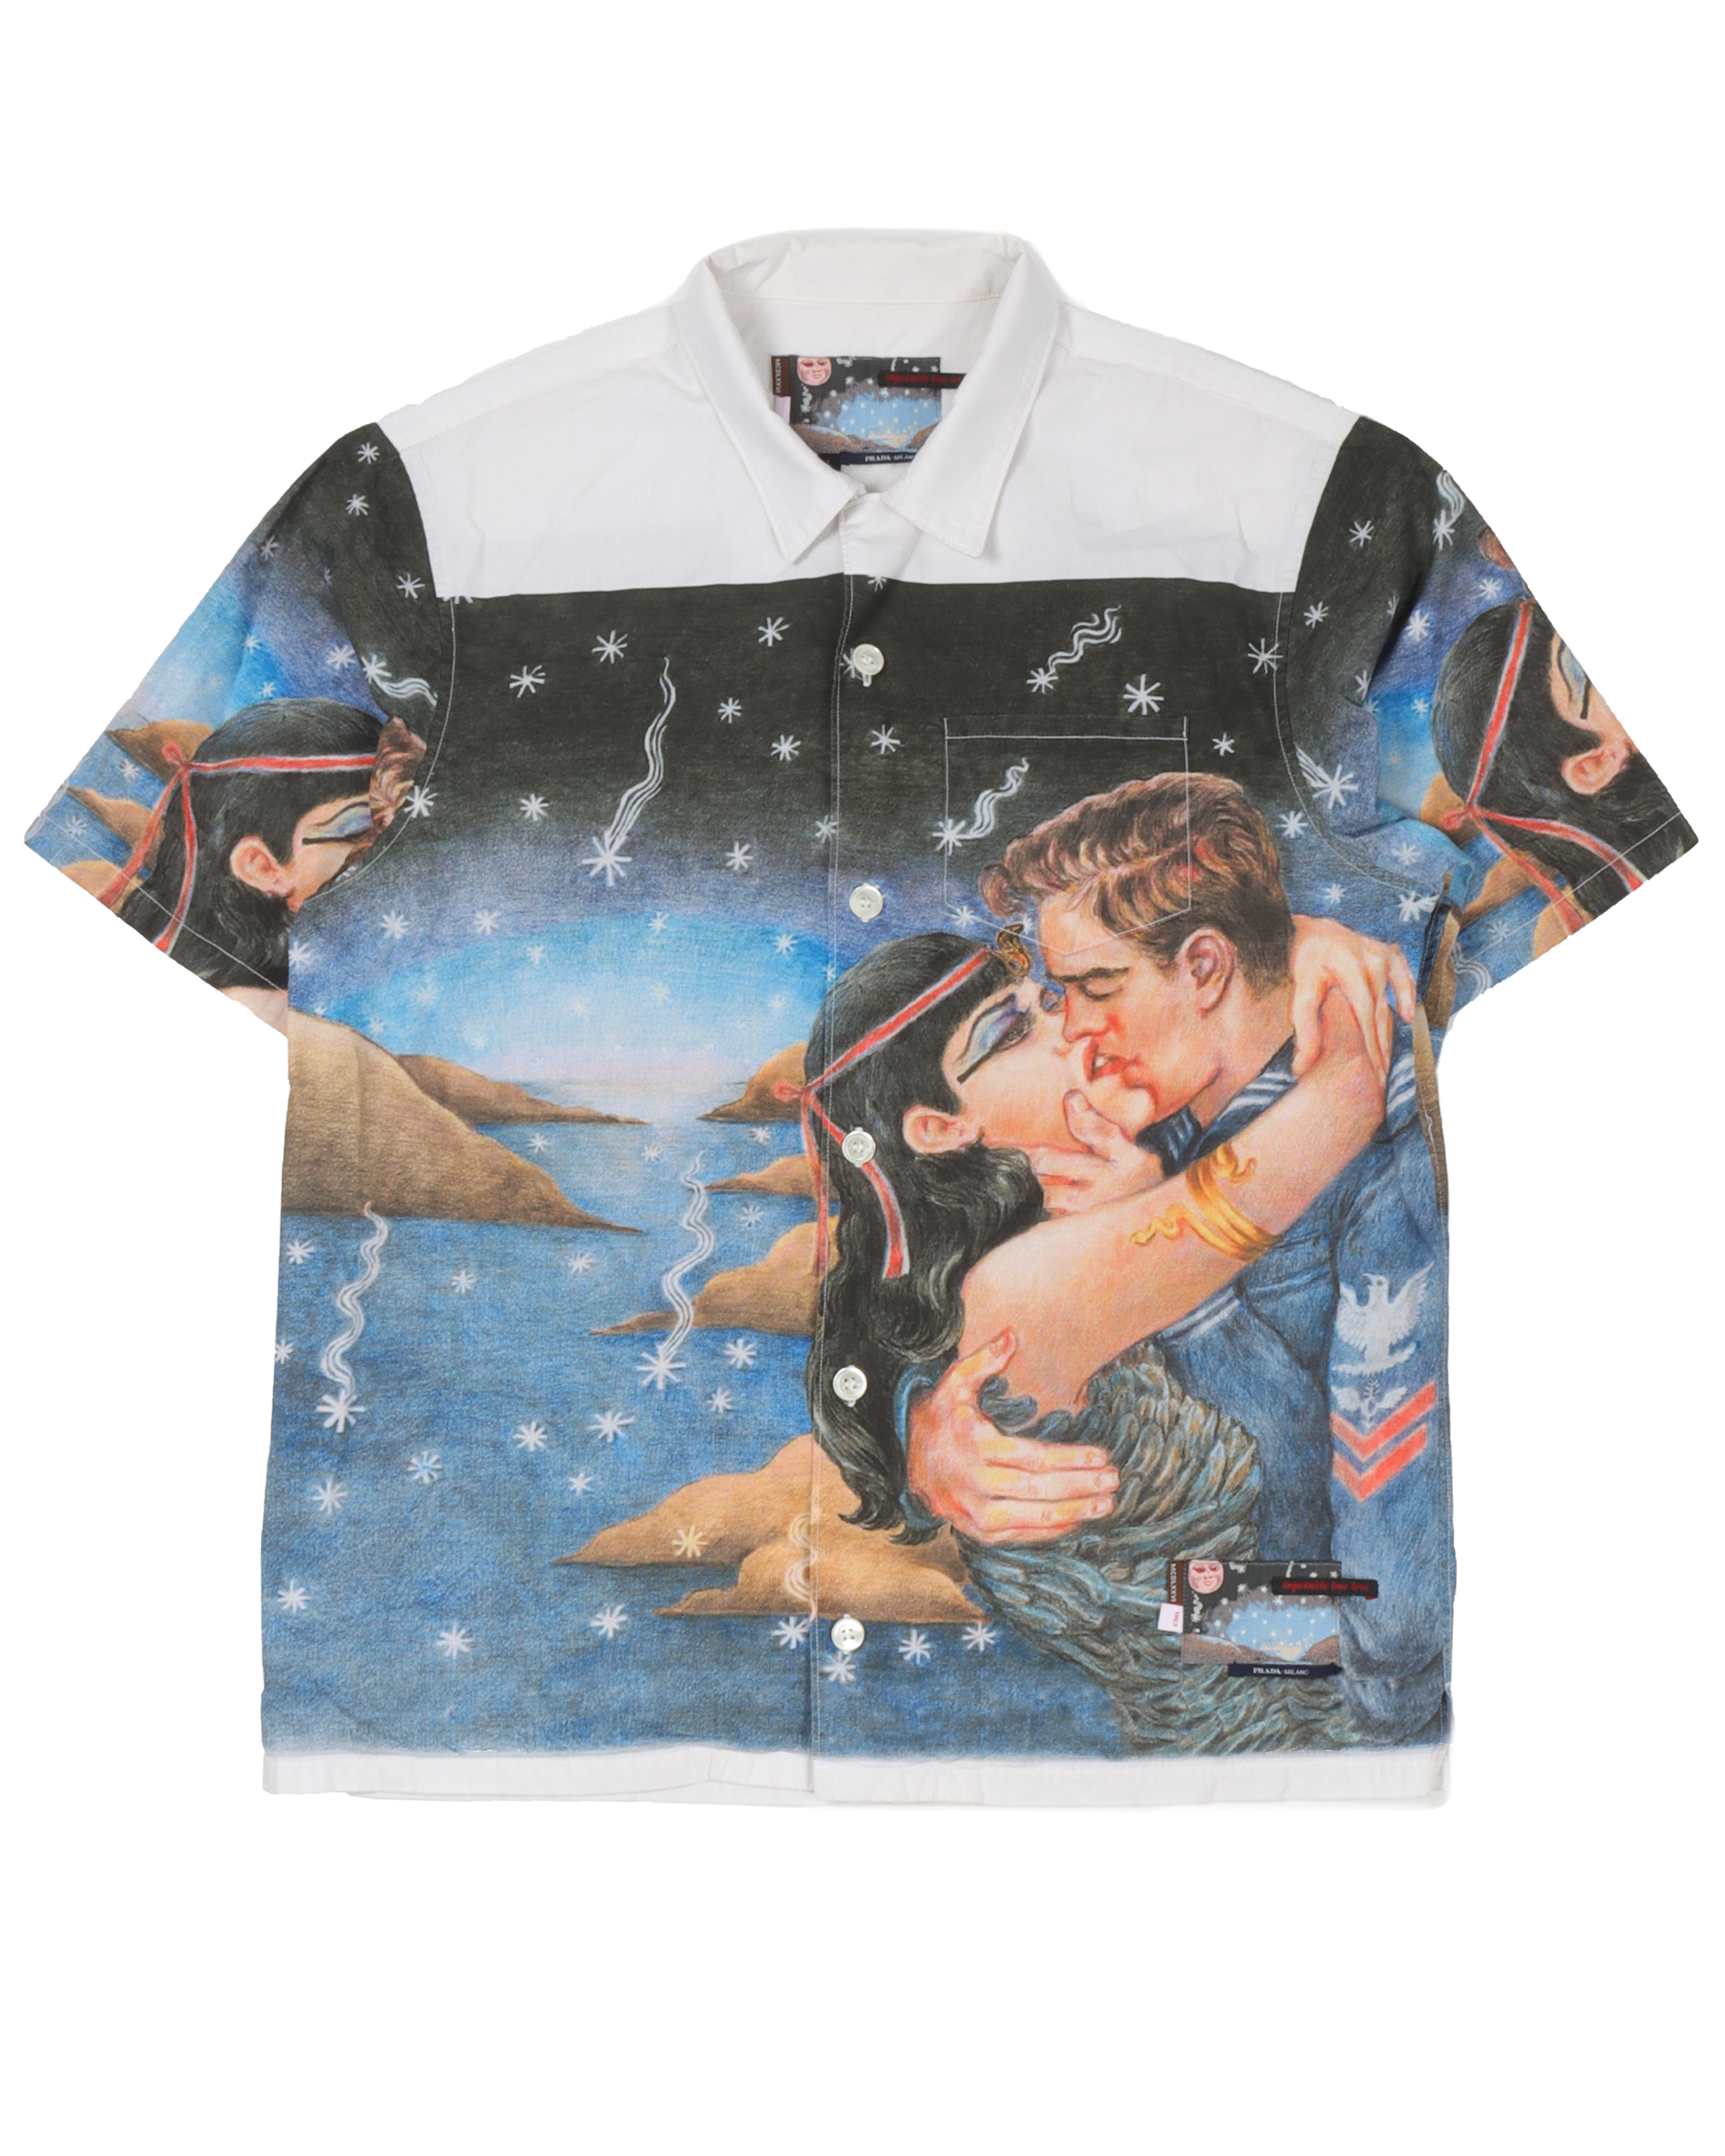 FW16 Impossible True Love Shirt